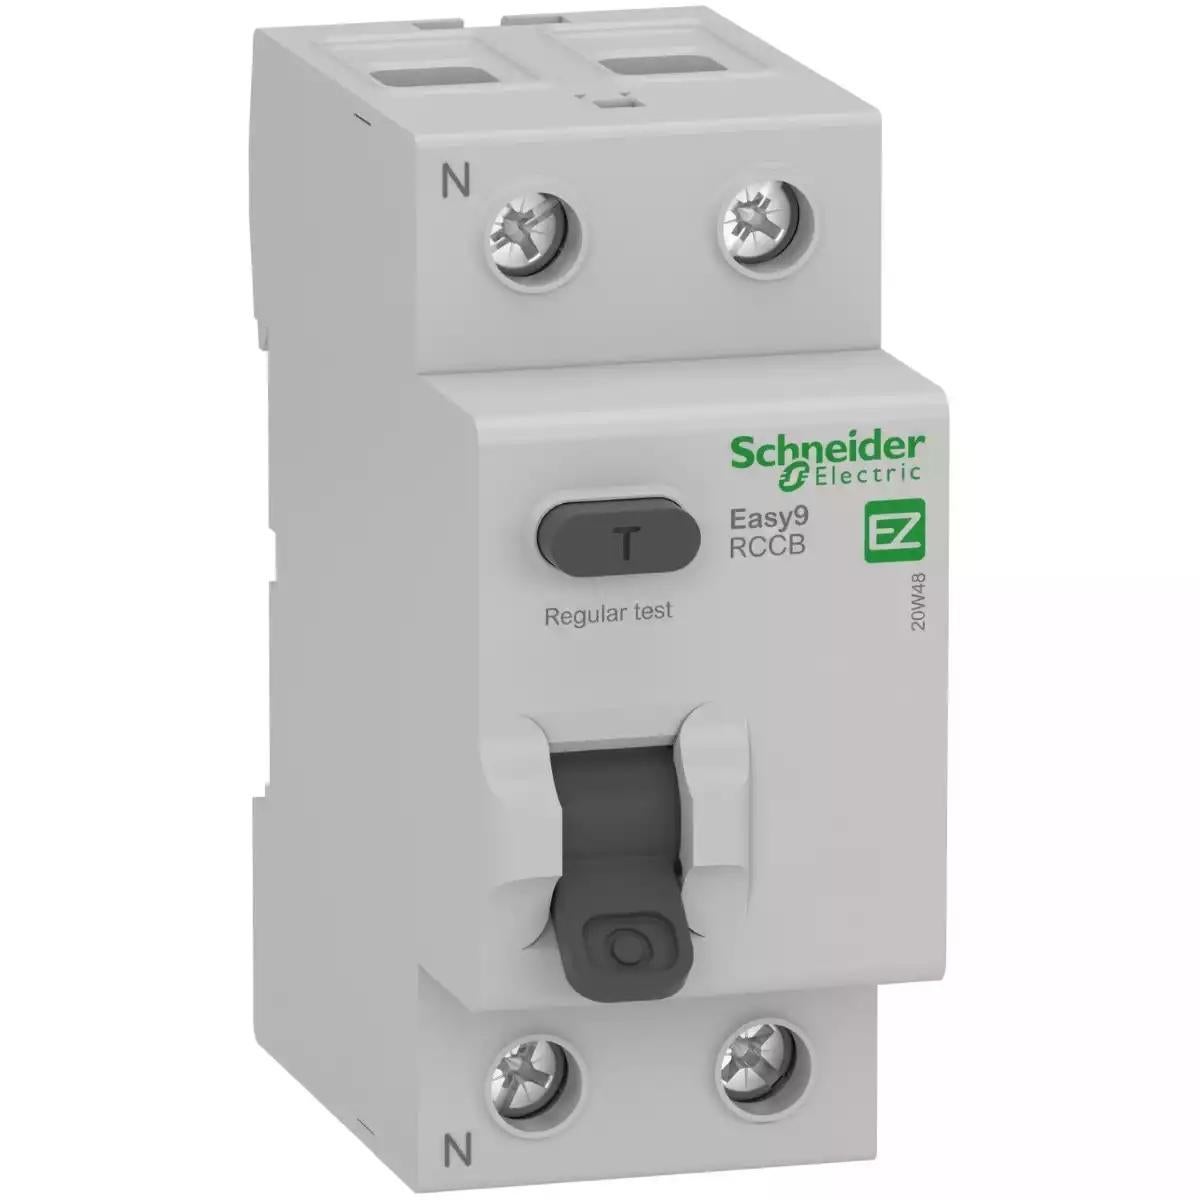 Easy9 Residual Current Circuit Breaker - 2P - 63 A - 30 mA - AC type - 230 V